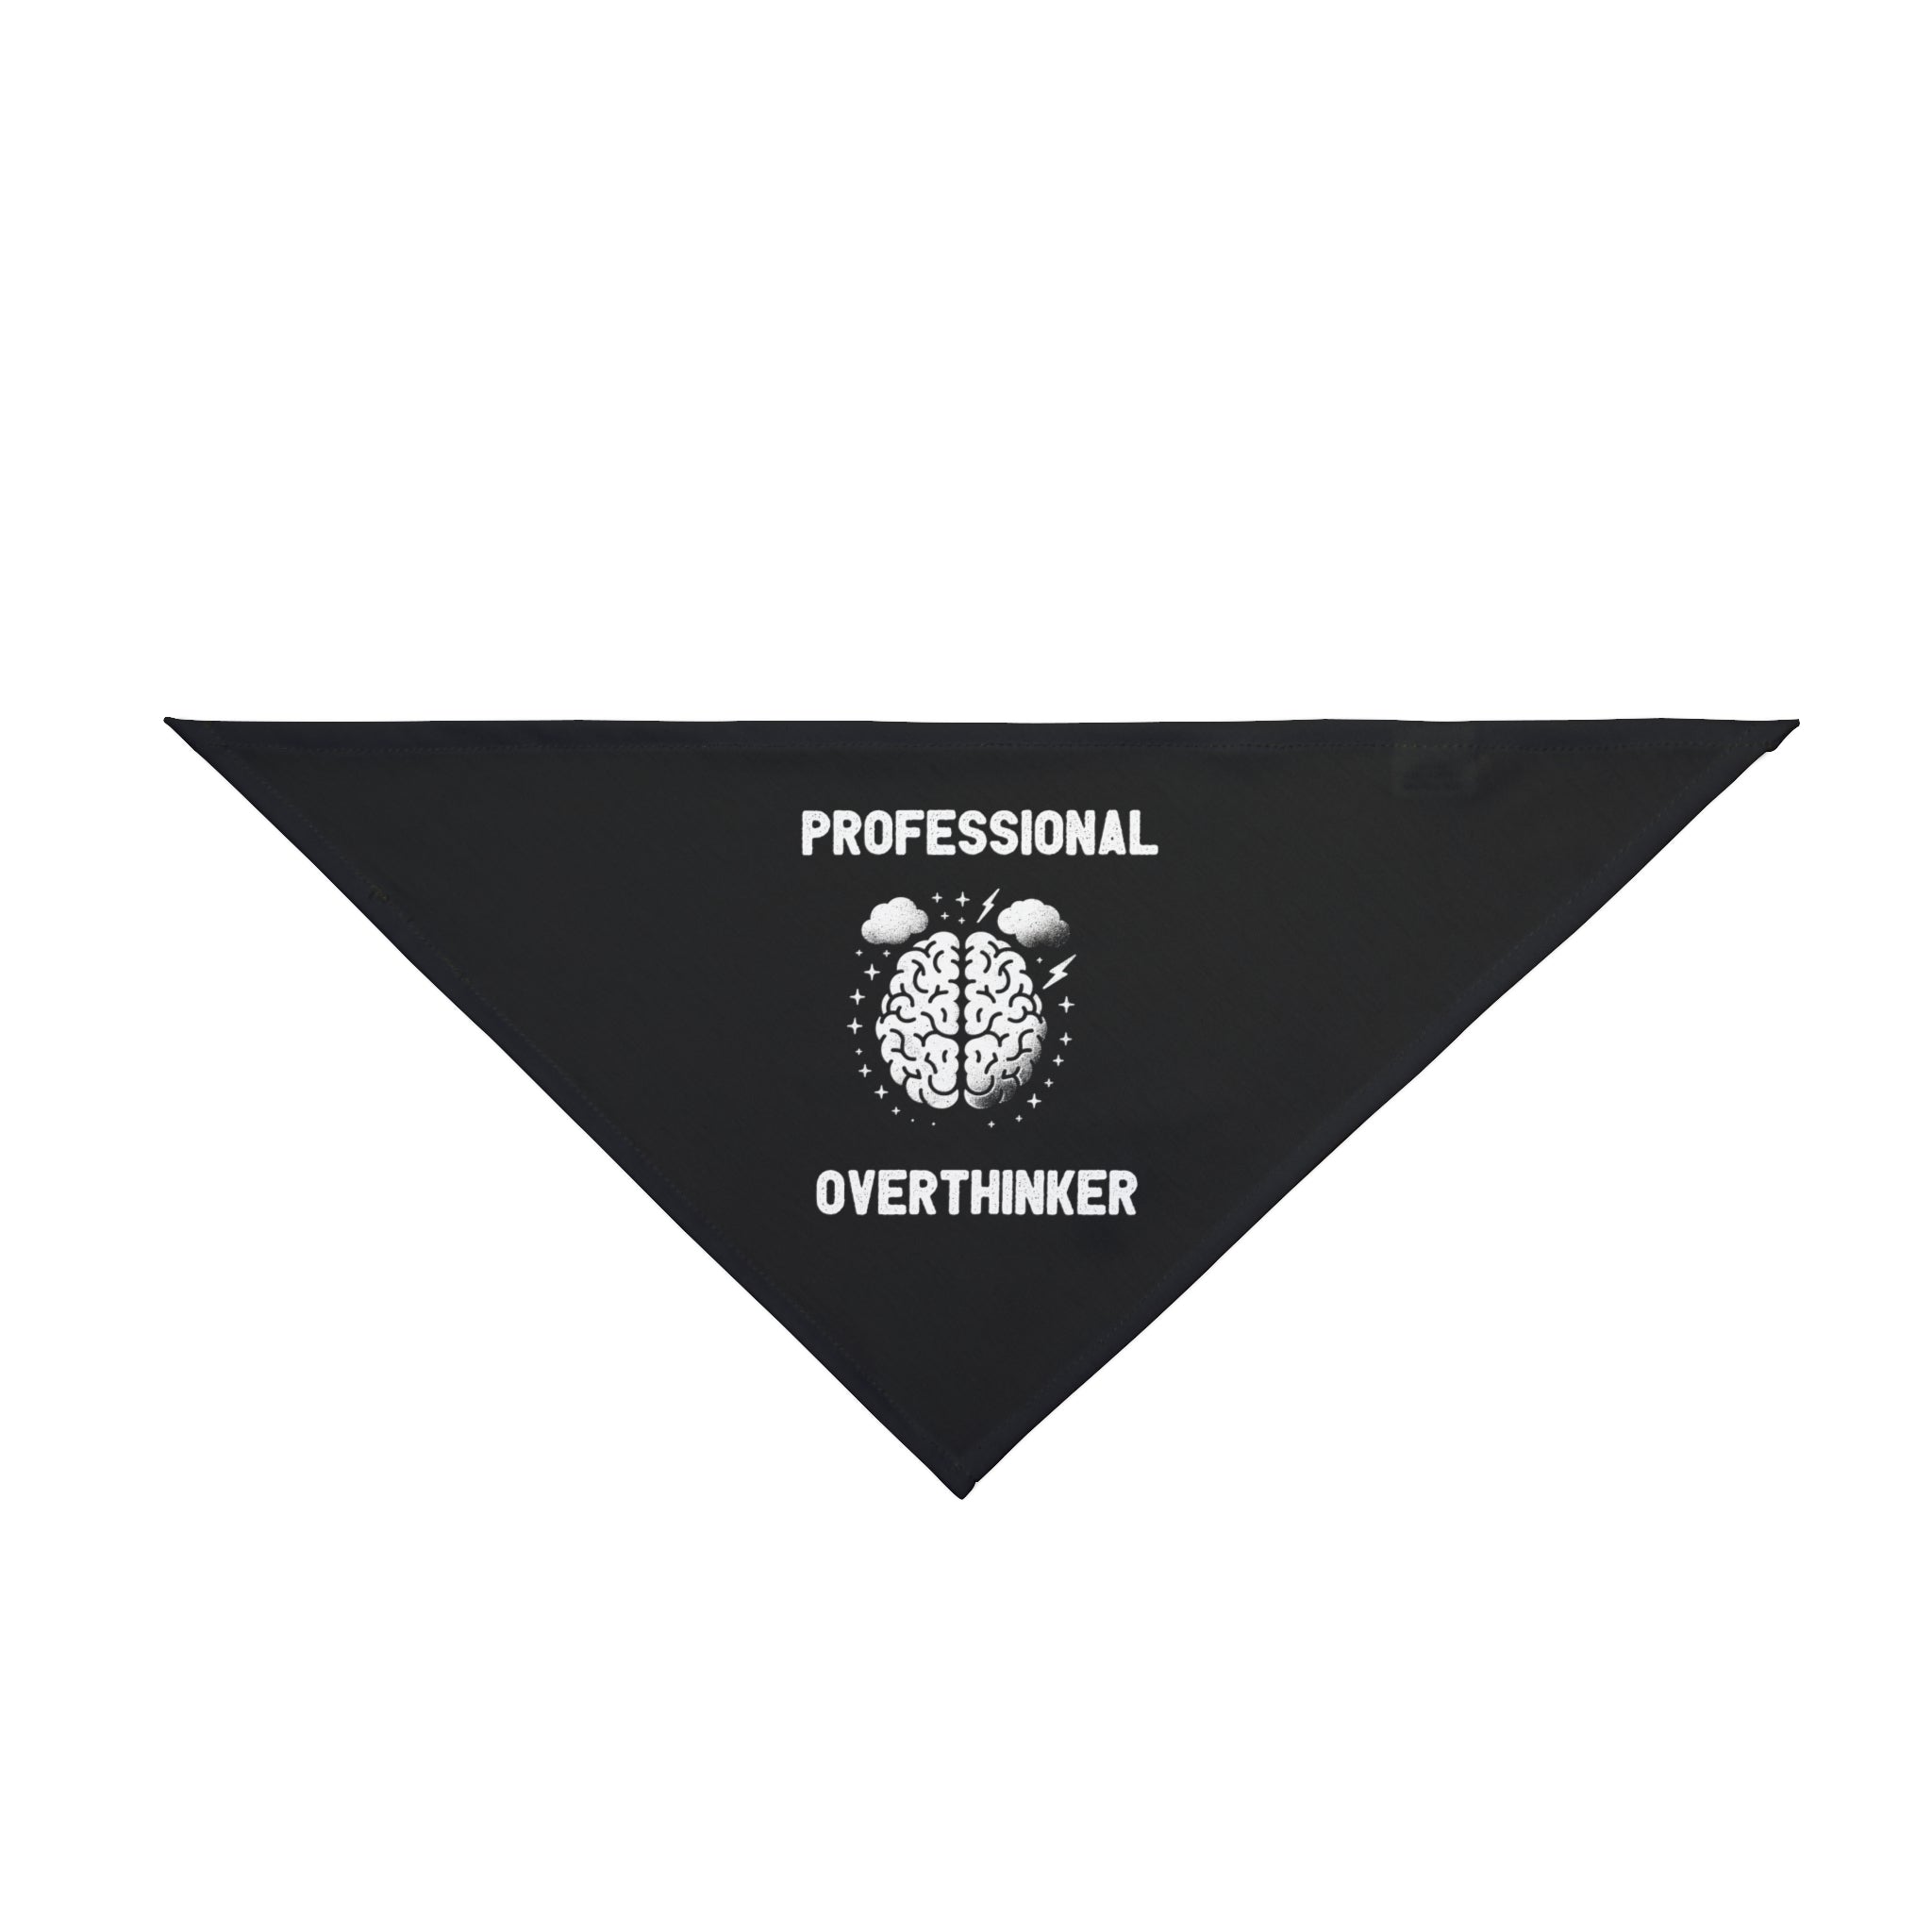 Black soft-spun polyester **Professional Overthinker - Pet Bandana** with the words "Professional Overthinker" printed in white above and below an illustration of a brain.